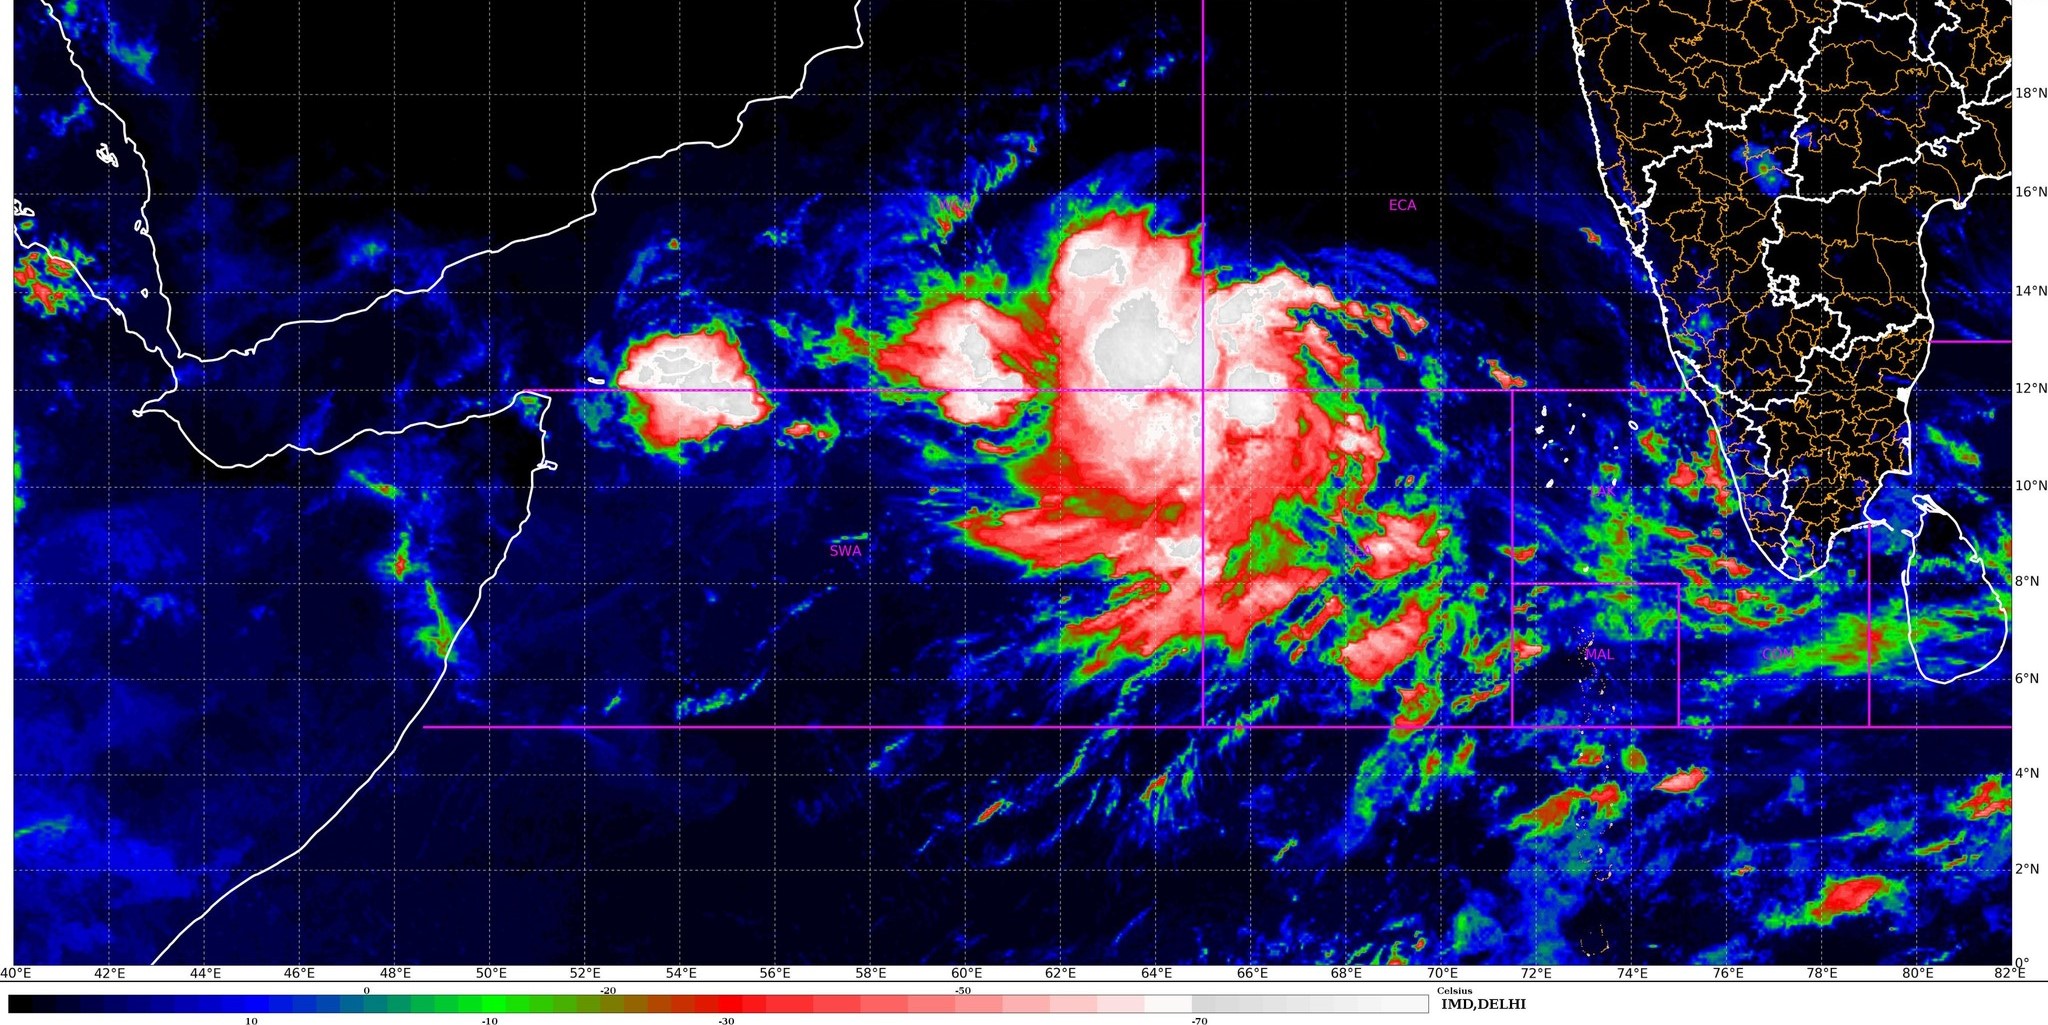 Cyclone forming over Arabian sea will bring rain to Kerala, but monsoon may be further delayed